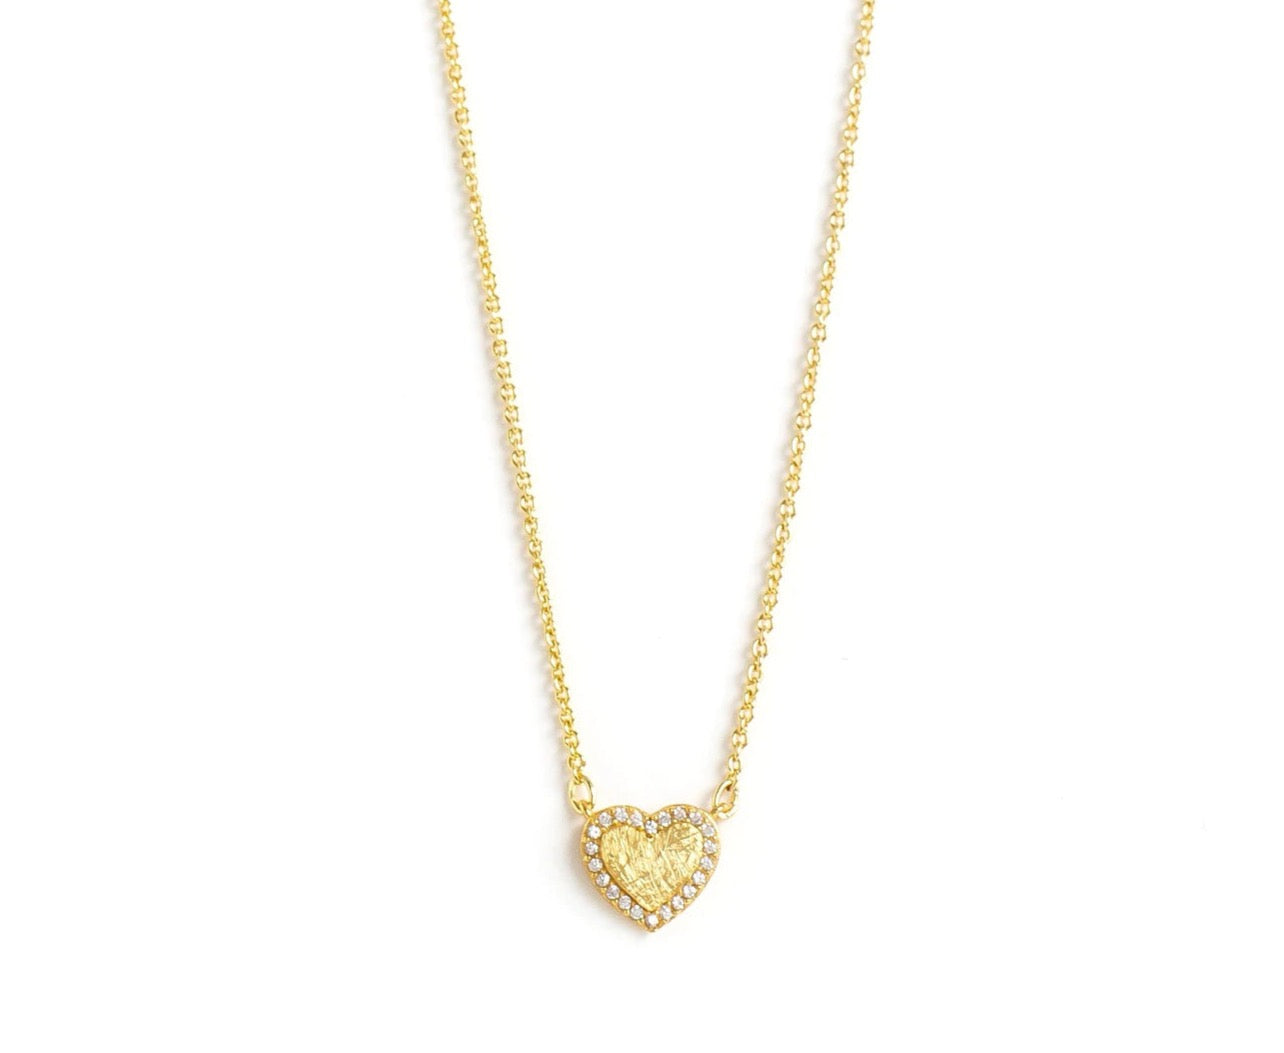 The gold heart necklace features, an embossed distressed style within the gold heart garnished by a border of shimmery cubic zirconia stones.The heart charm is hanging from  a yellow-gold toned adjustable 18" chain. 